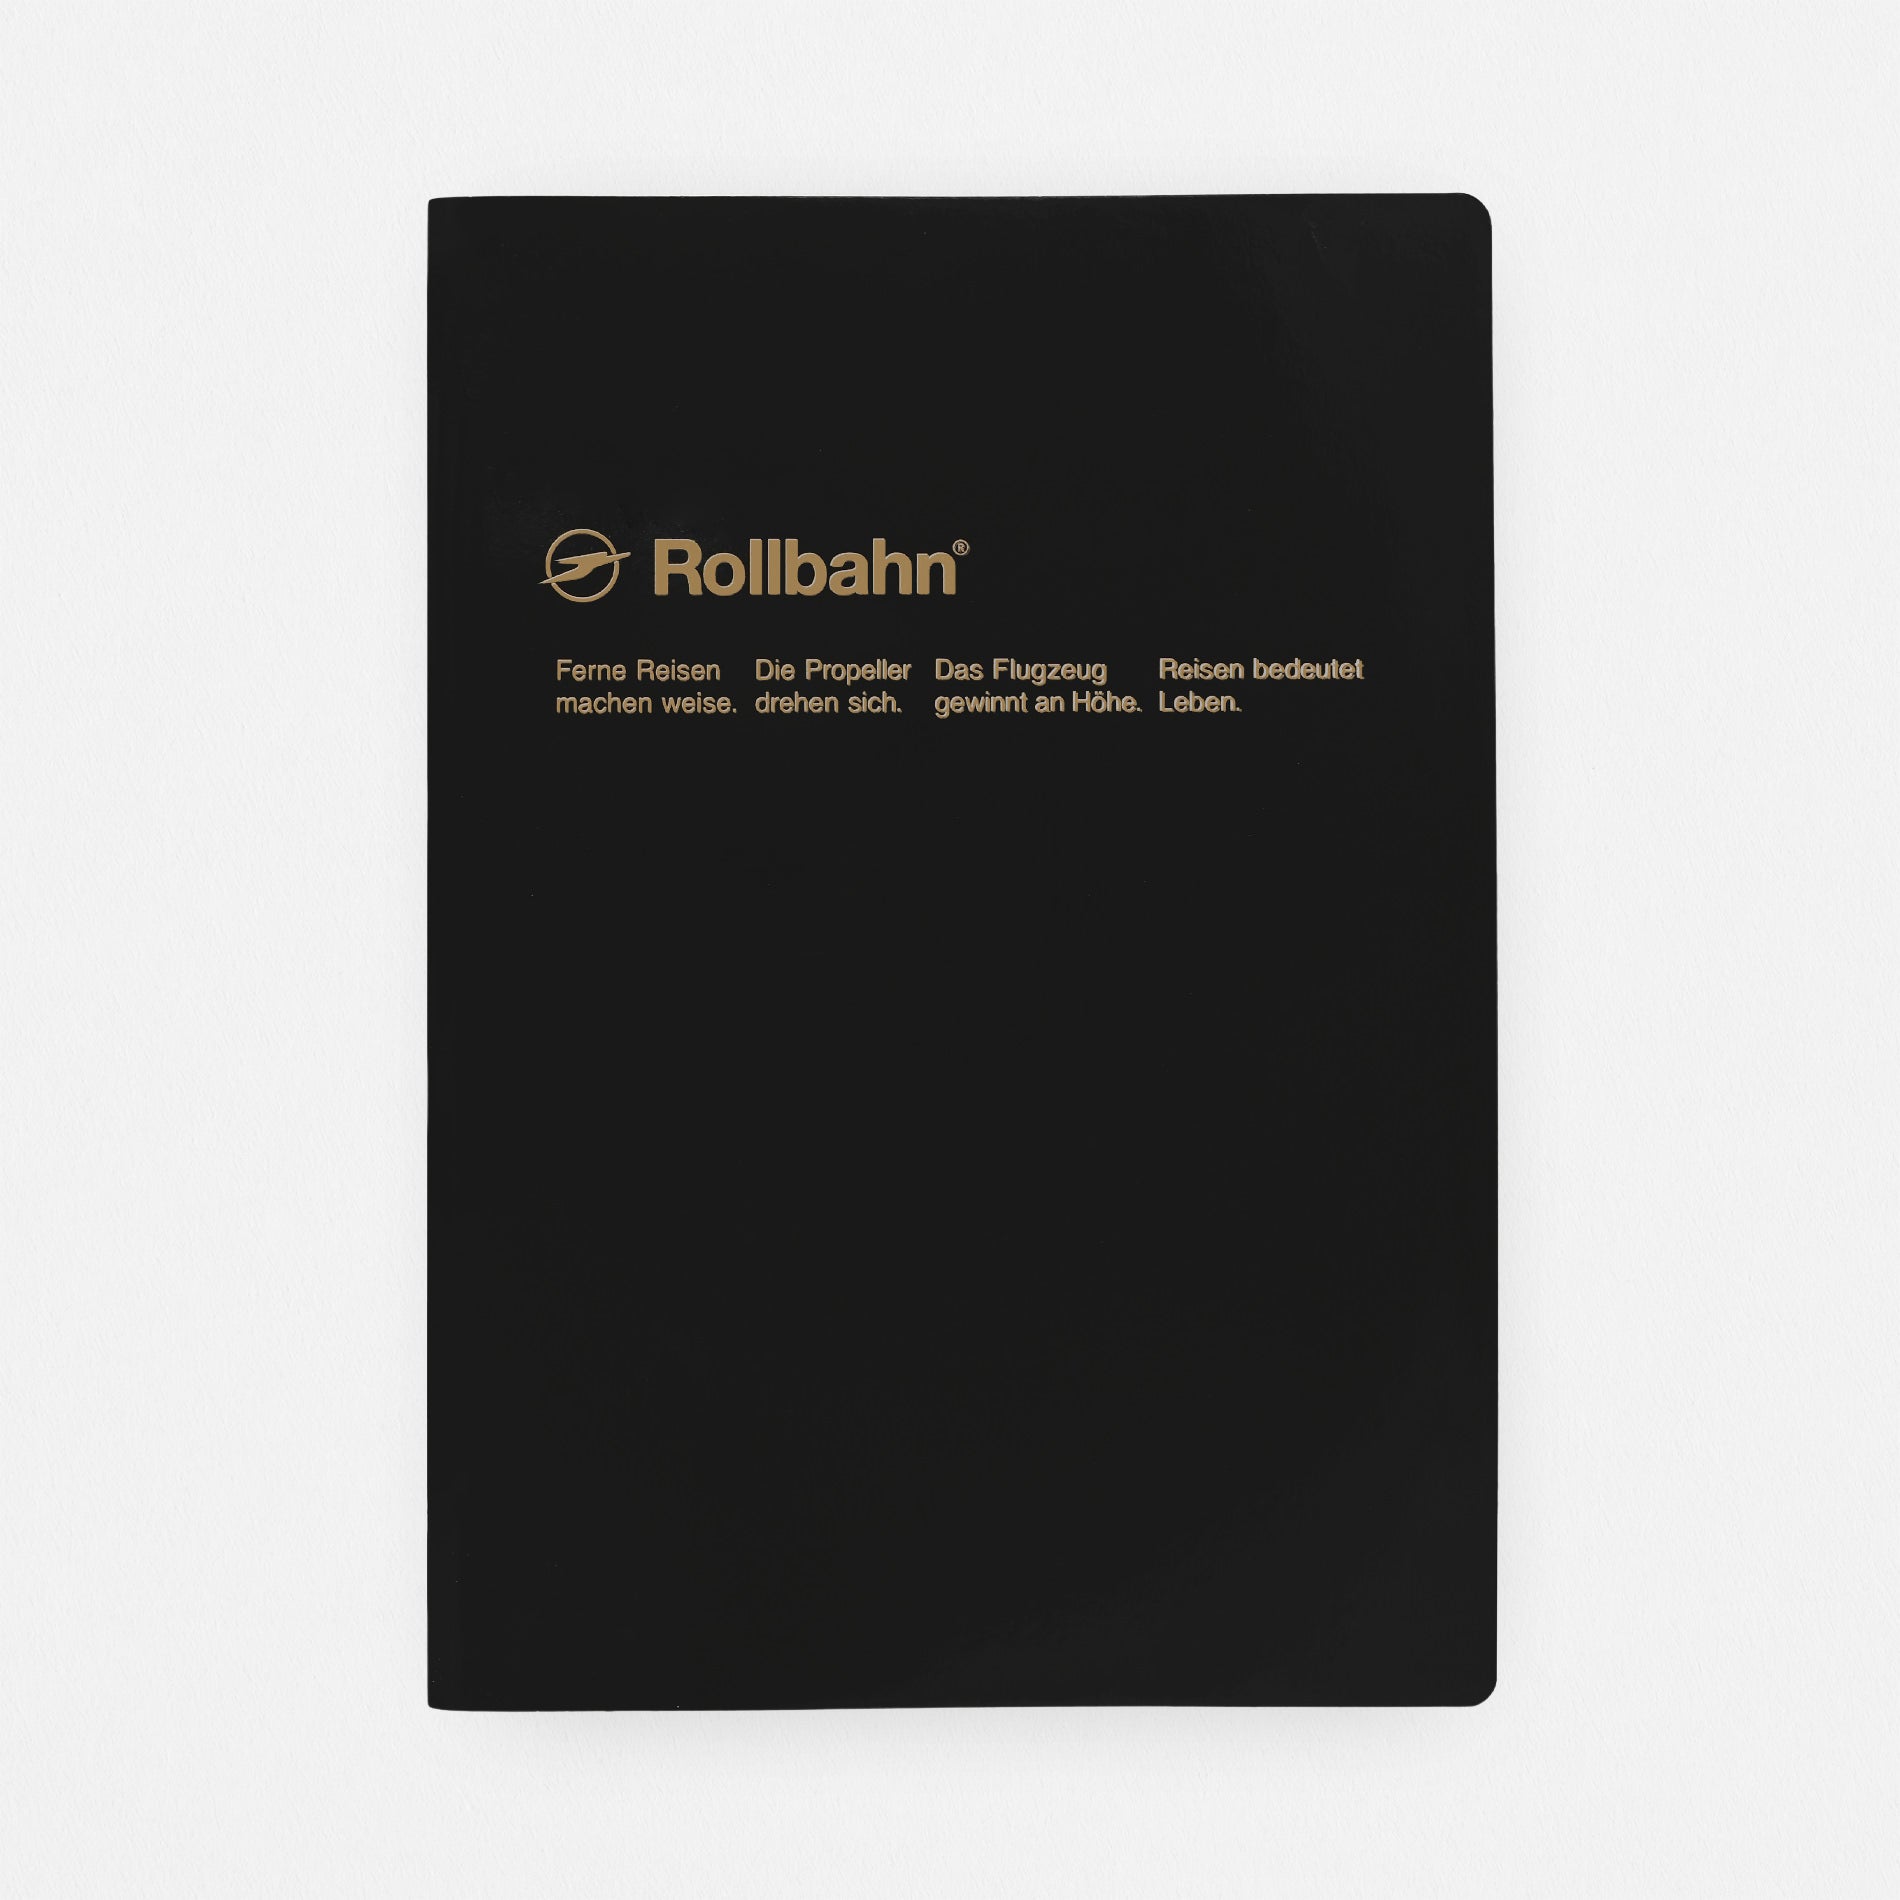 Delfonics Rollbahn "Note" Notebook Pocket, Large, A5 Or Extra Large  | 10 Colors Black / Pocket A6 ( 4 x 6")